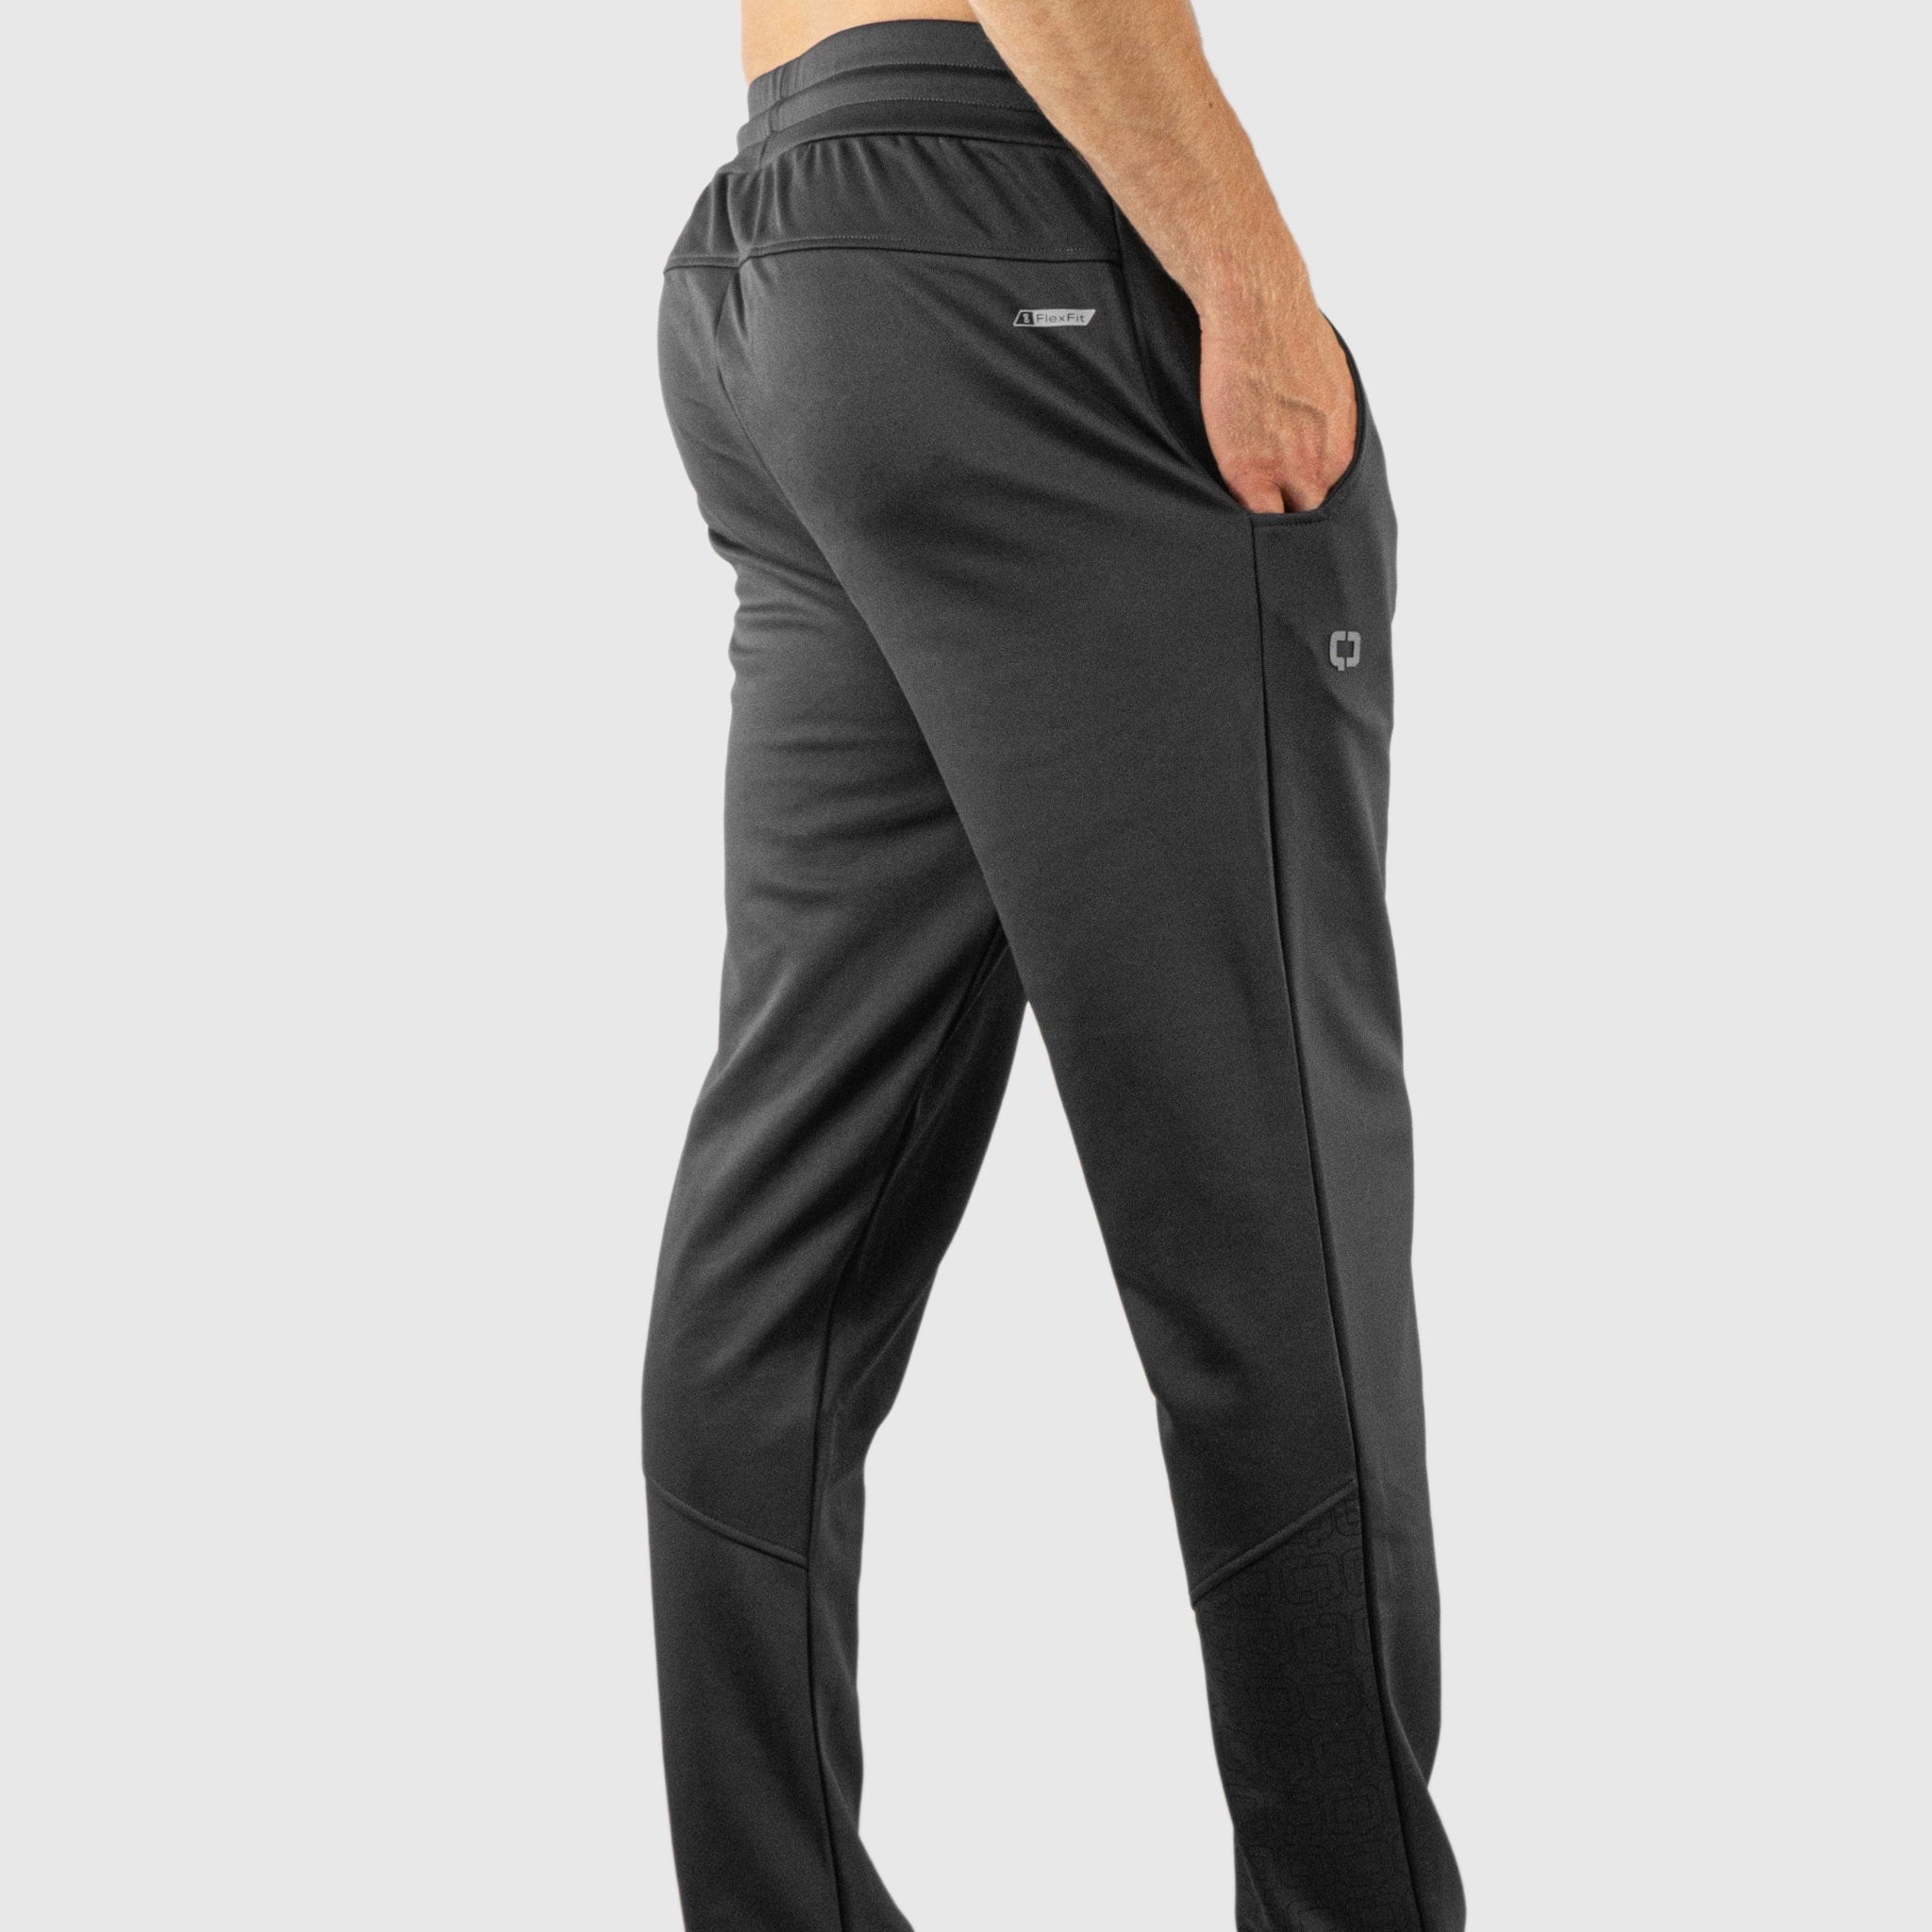 Quad Padel First-Class Tracksuit pants right side